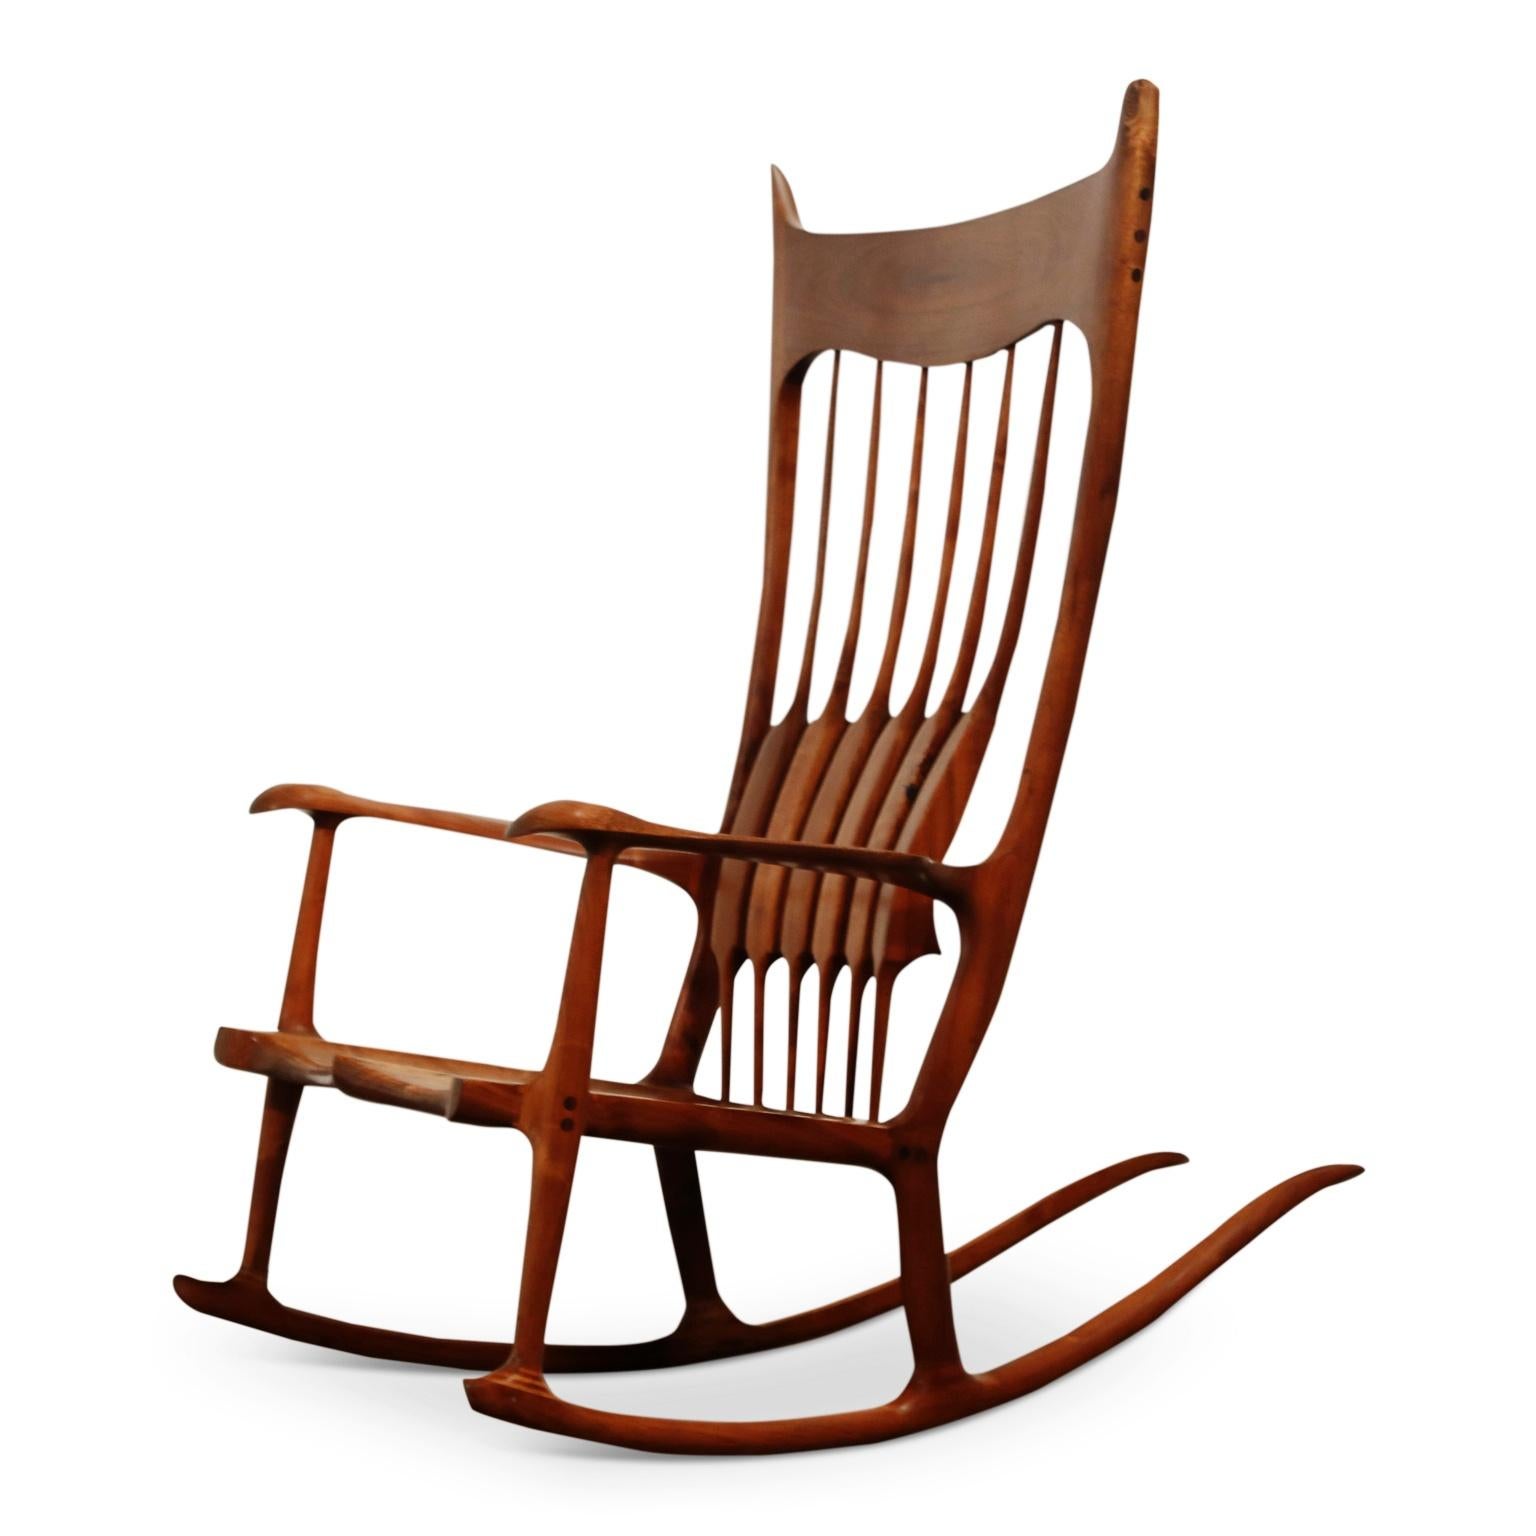 An incredibly stunning large scale studio rocking chair by Charles Jacobs, signed and dated 11-8-85. 

This monumental Sam Maloof style craftsman chair was handcrafted with solid, heavily grained, hardwood, which was expertly finished with generous